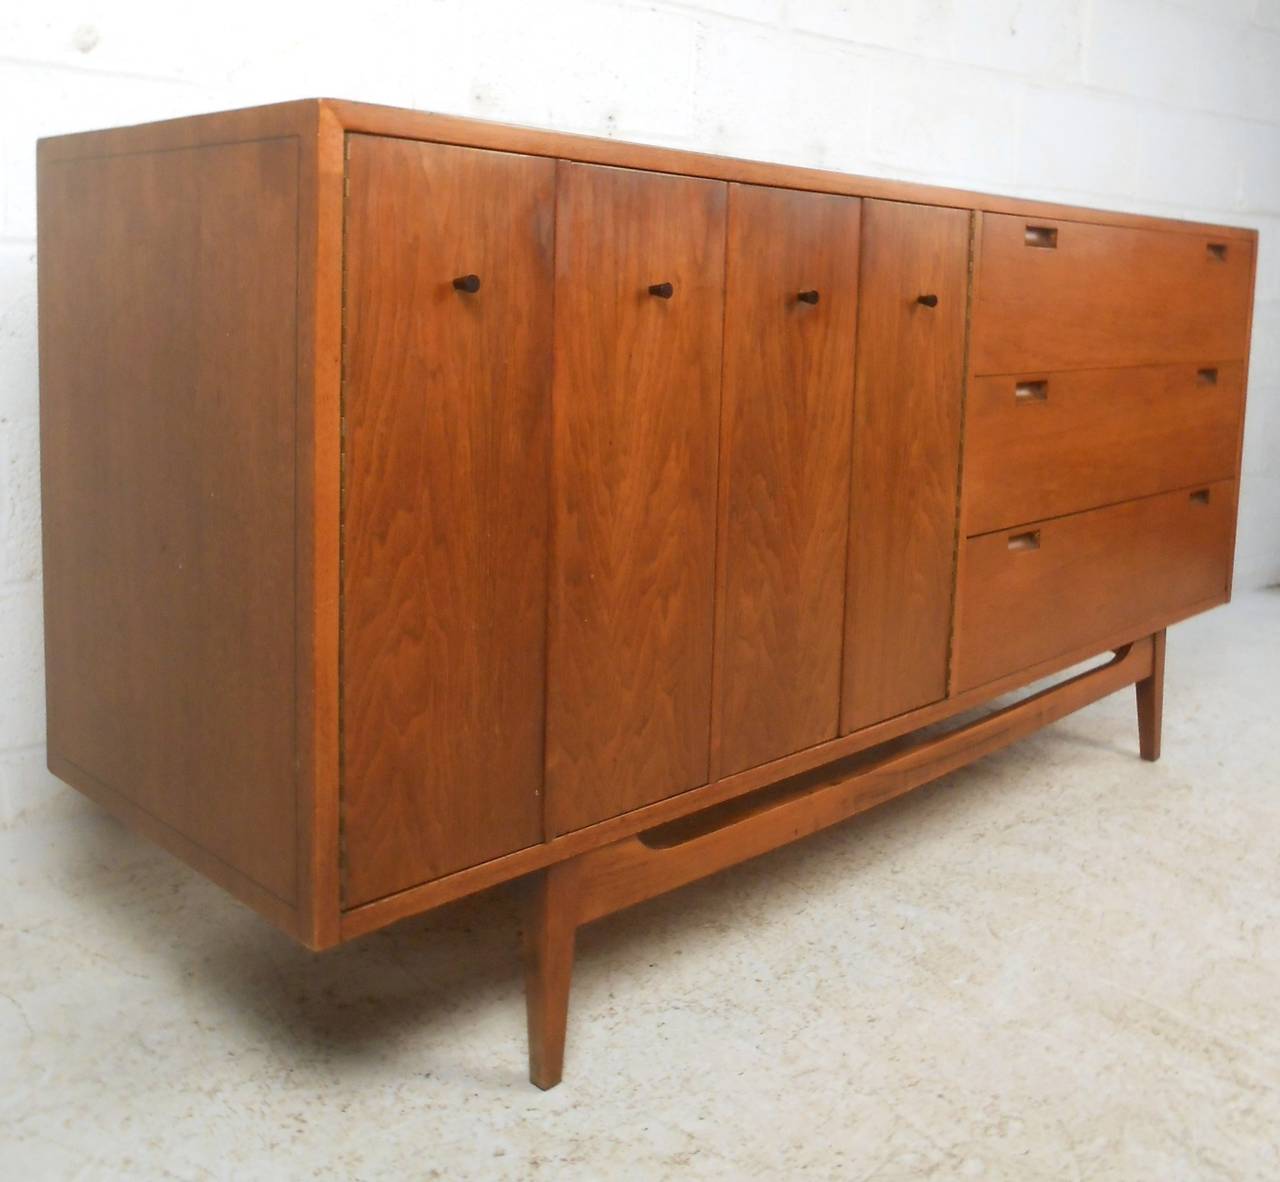 This mid-century modern dresser by American of Martinsville features unique drawer pulls, trifold door, and six spacious drawers for storage in any setting. Wonderful walnut finish and tapered legs with stretcher add to its vintage aesthetic. Please